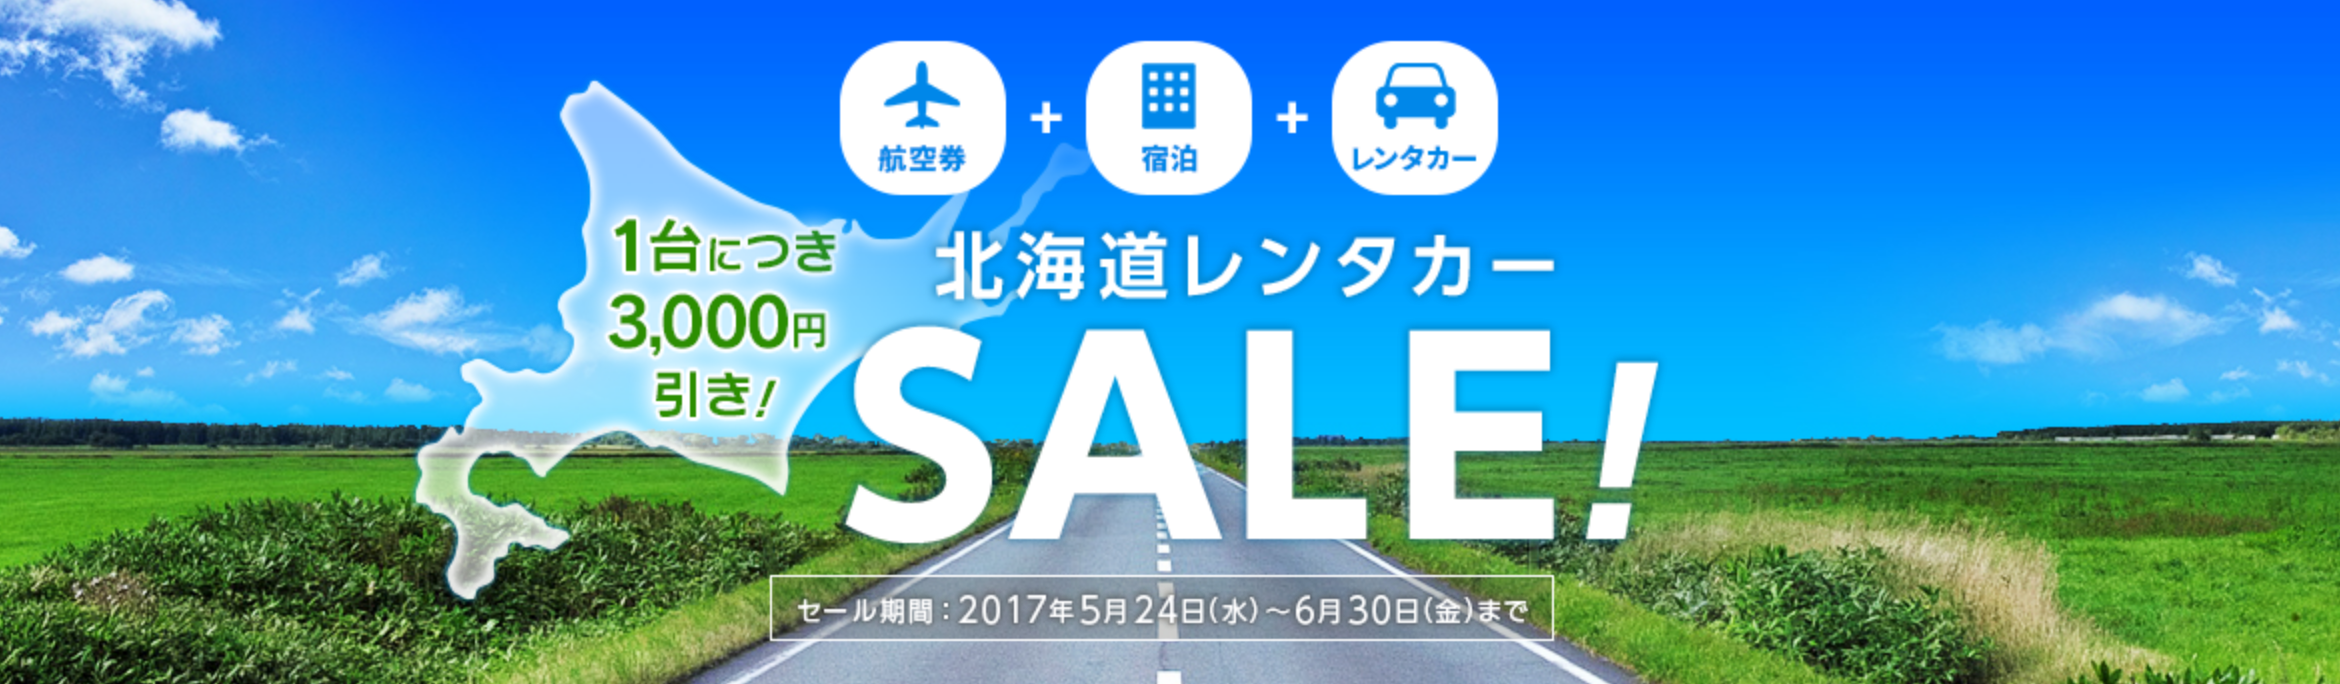 airdosale170526.png